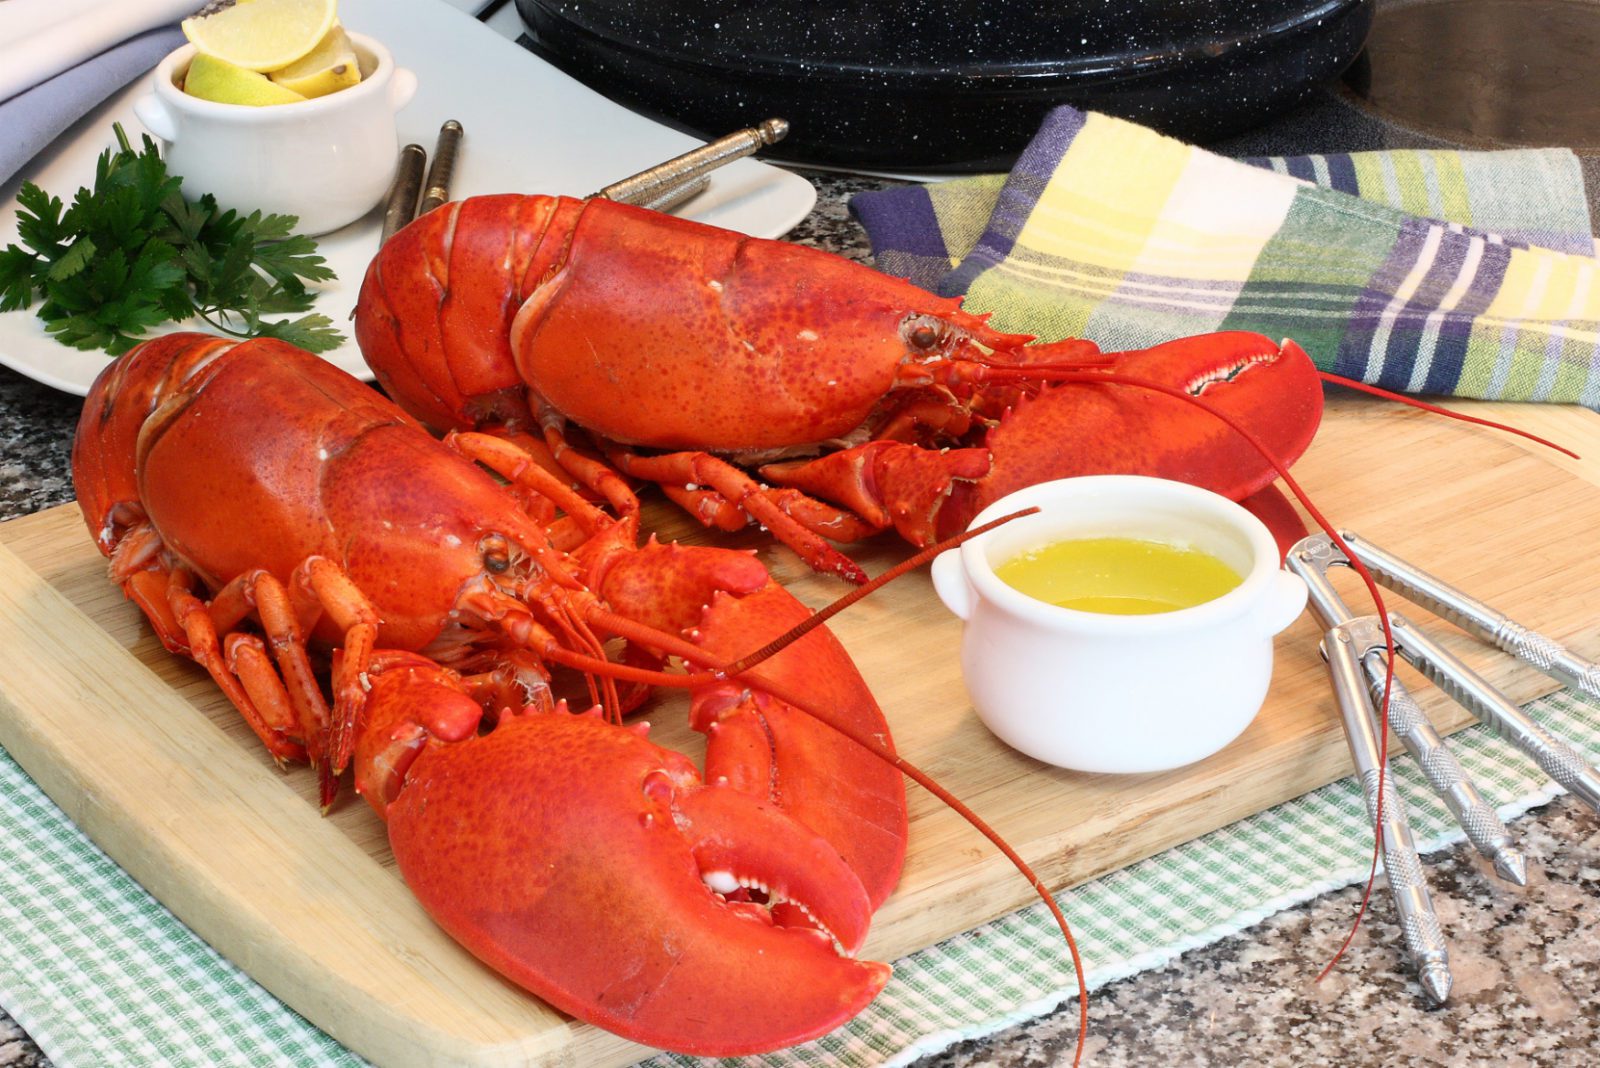 How to eat lobster, a guide to ordering in a restaurant | Scotsman Food ...